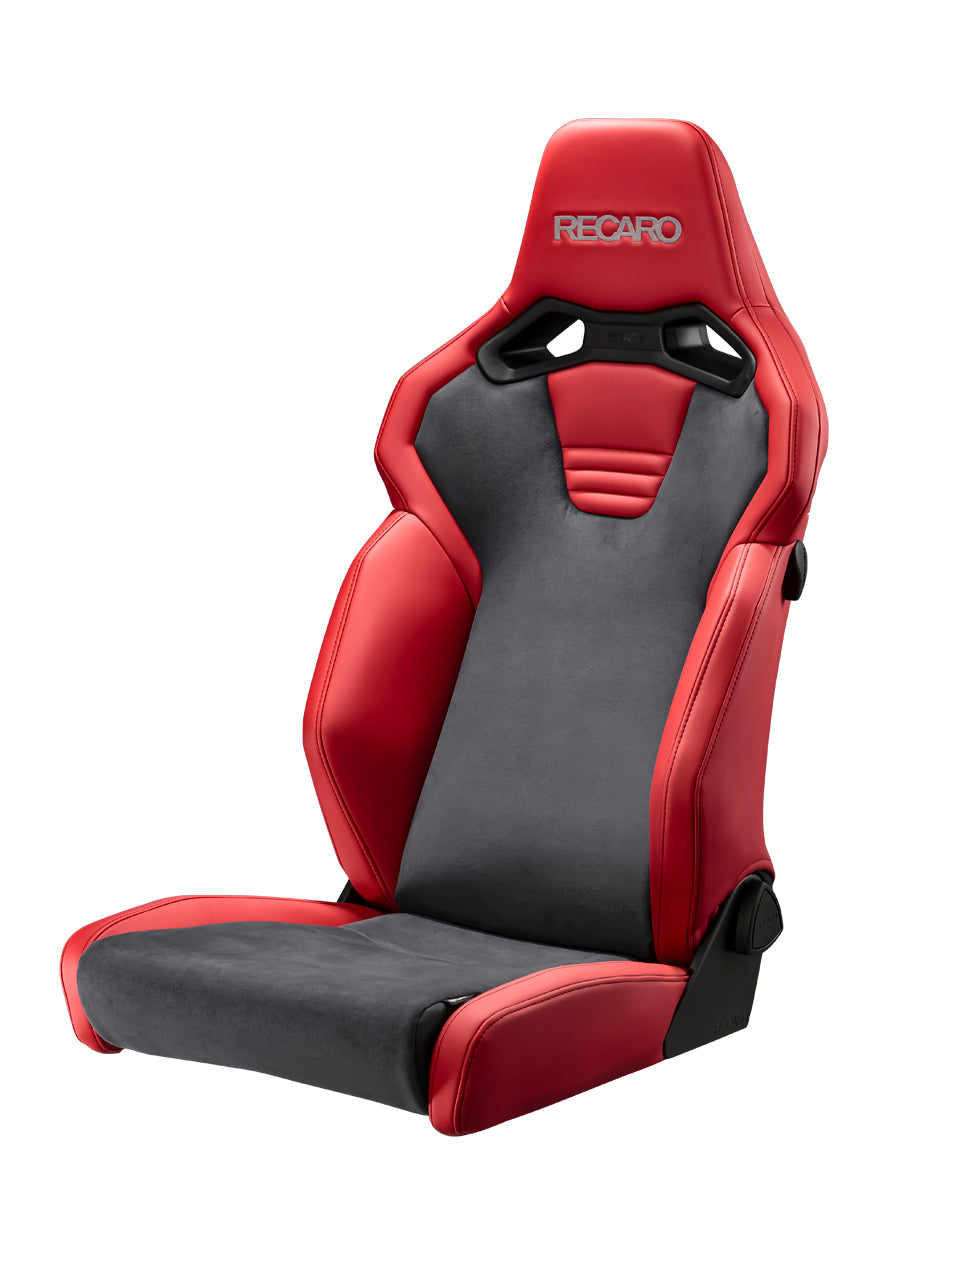 RECARO SR-C UT100 CG RD ARTIFICIAL LEATHER RED COLOR AND ULTRA SUEDE CHARCOAL GRAY COLOR SEAT FOR  81-121.20.647-0